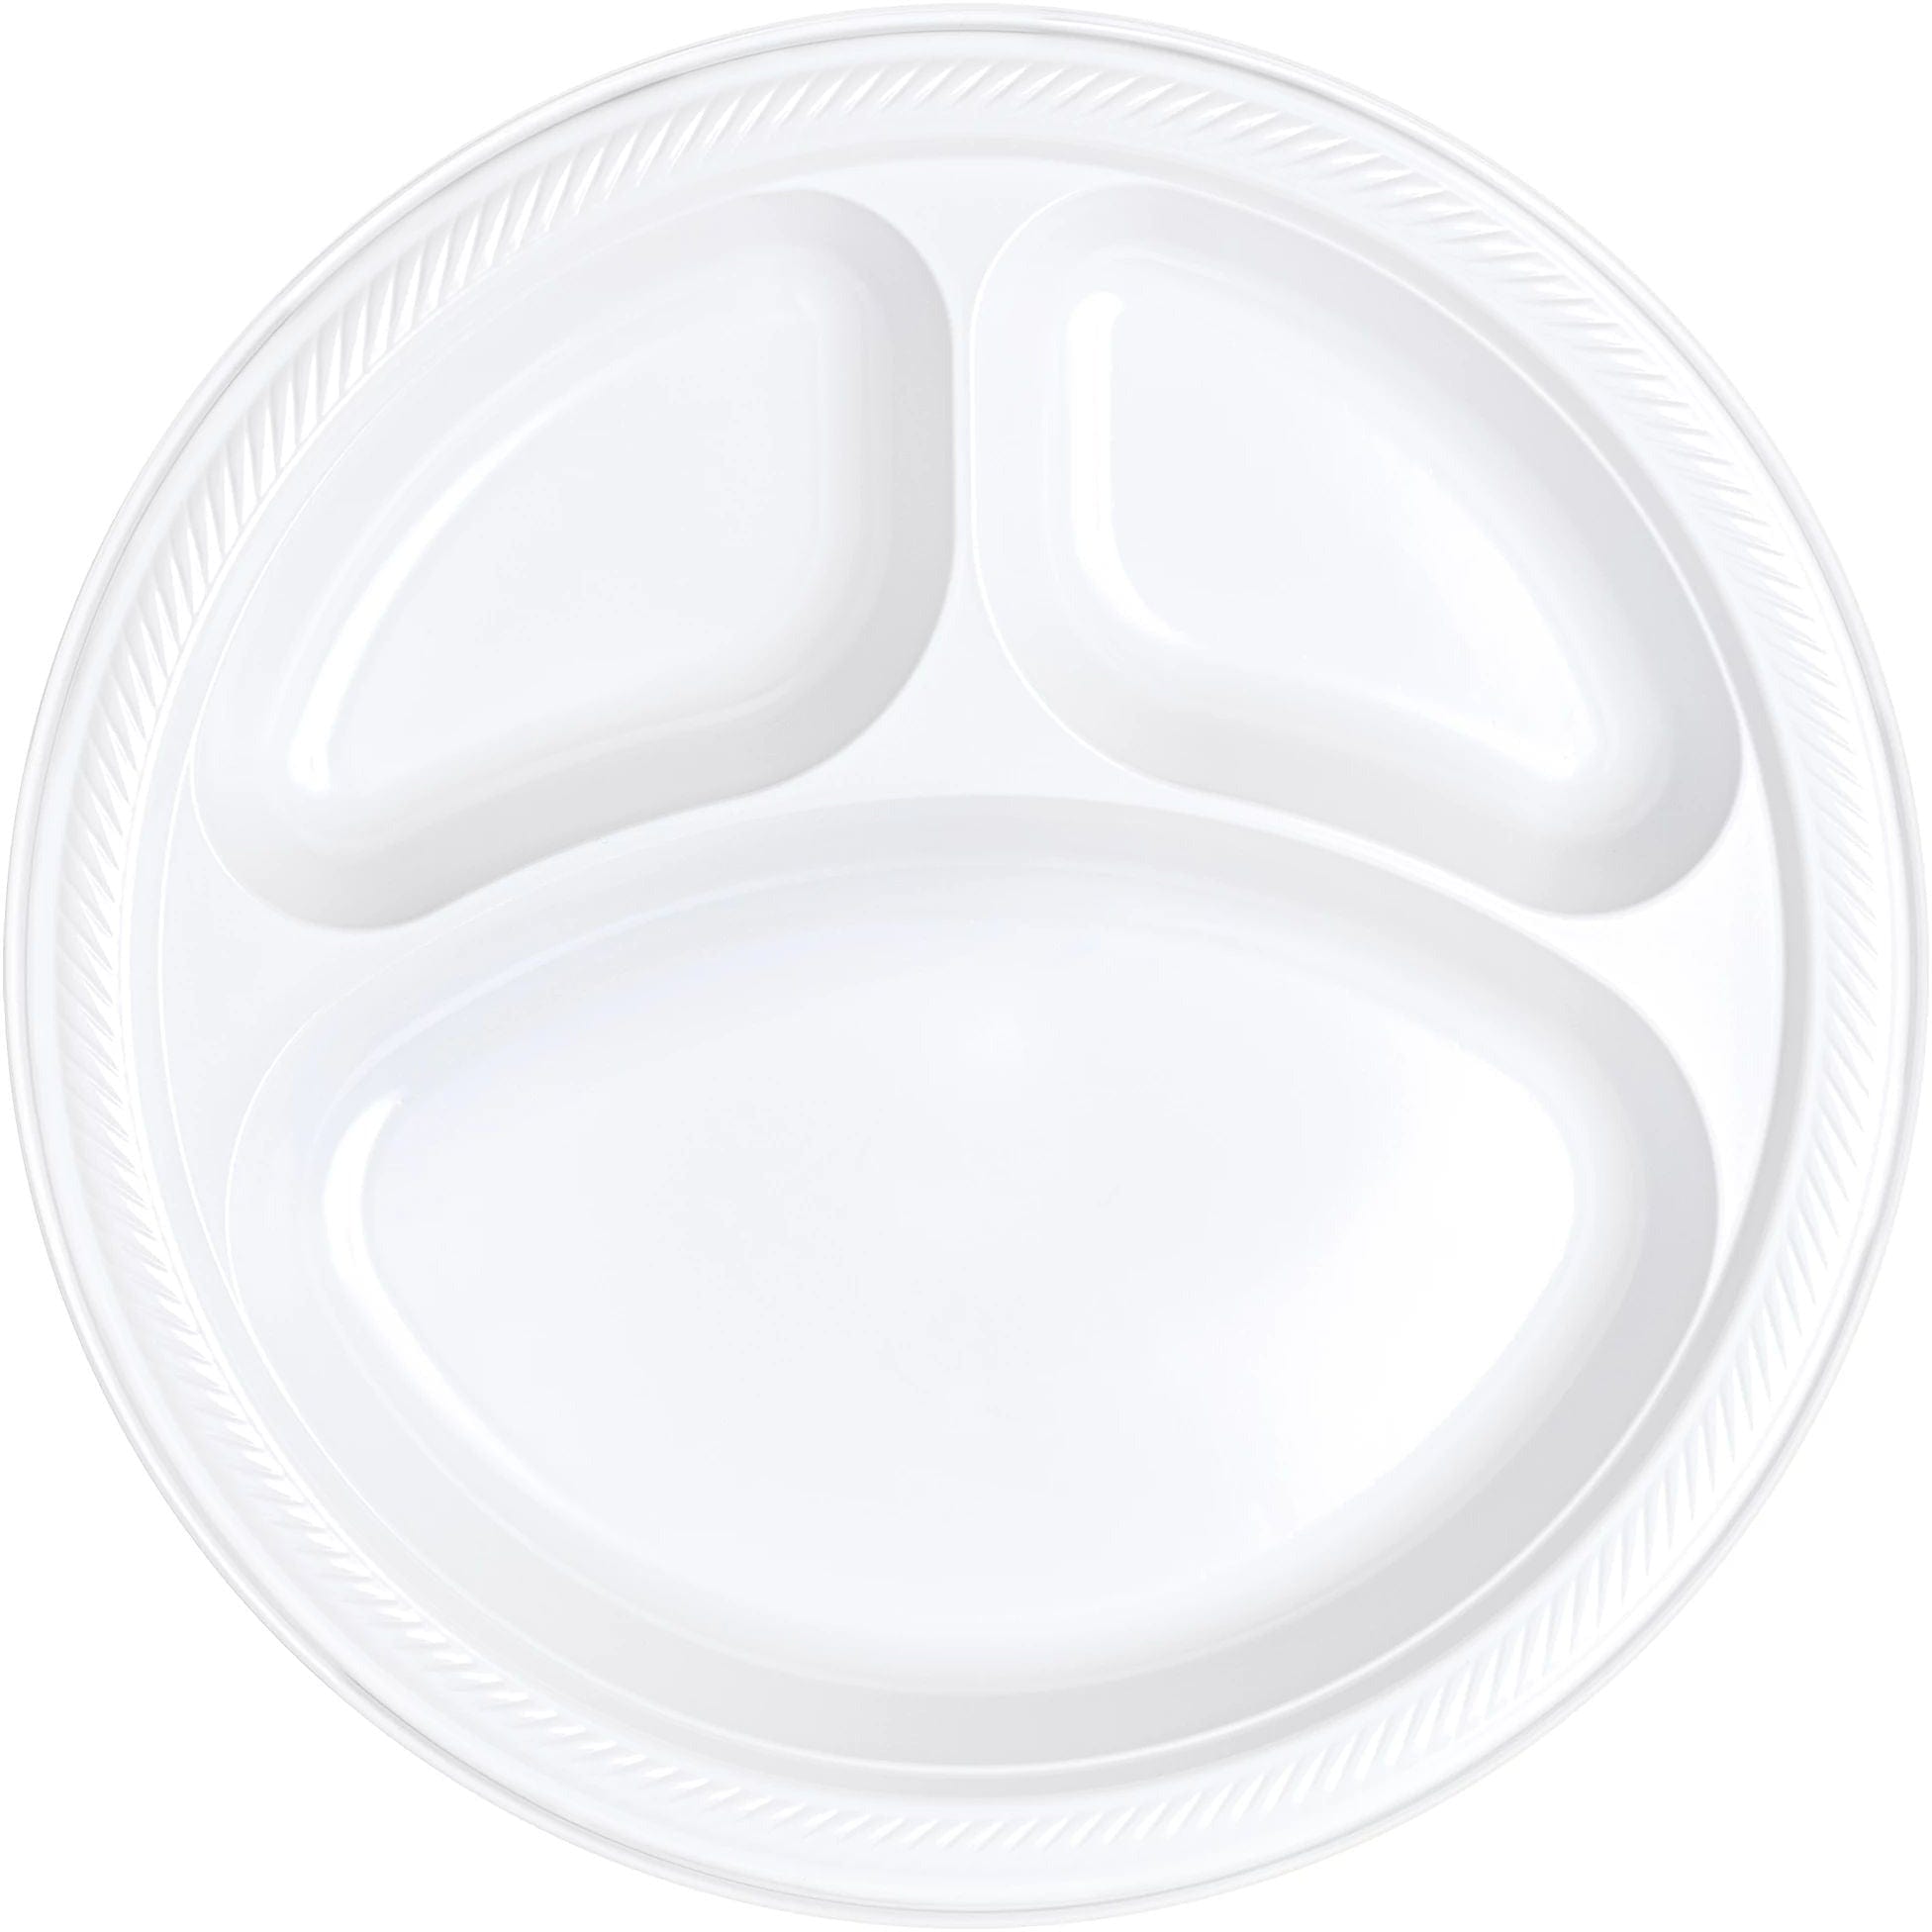 Amscan BASIC Frosty White Compartment Plastic Plates